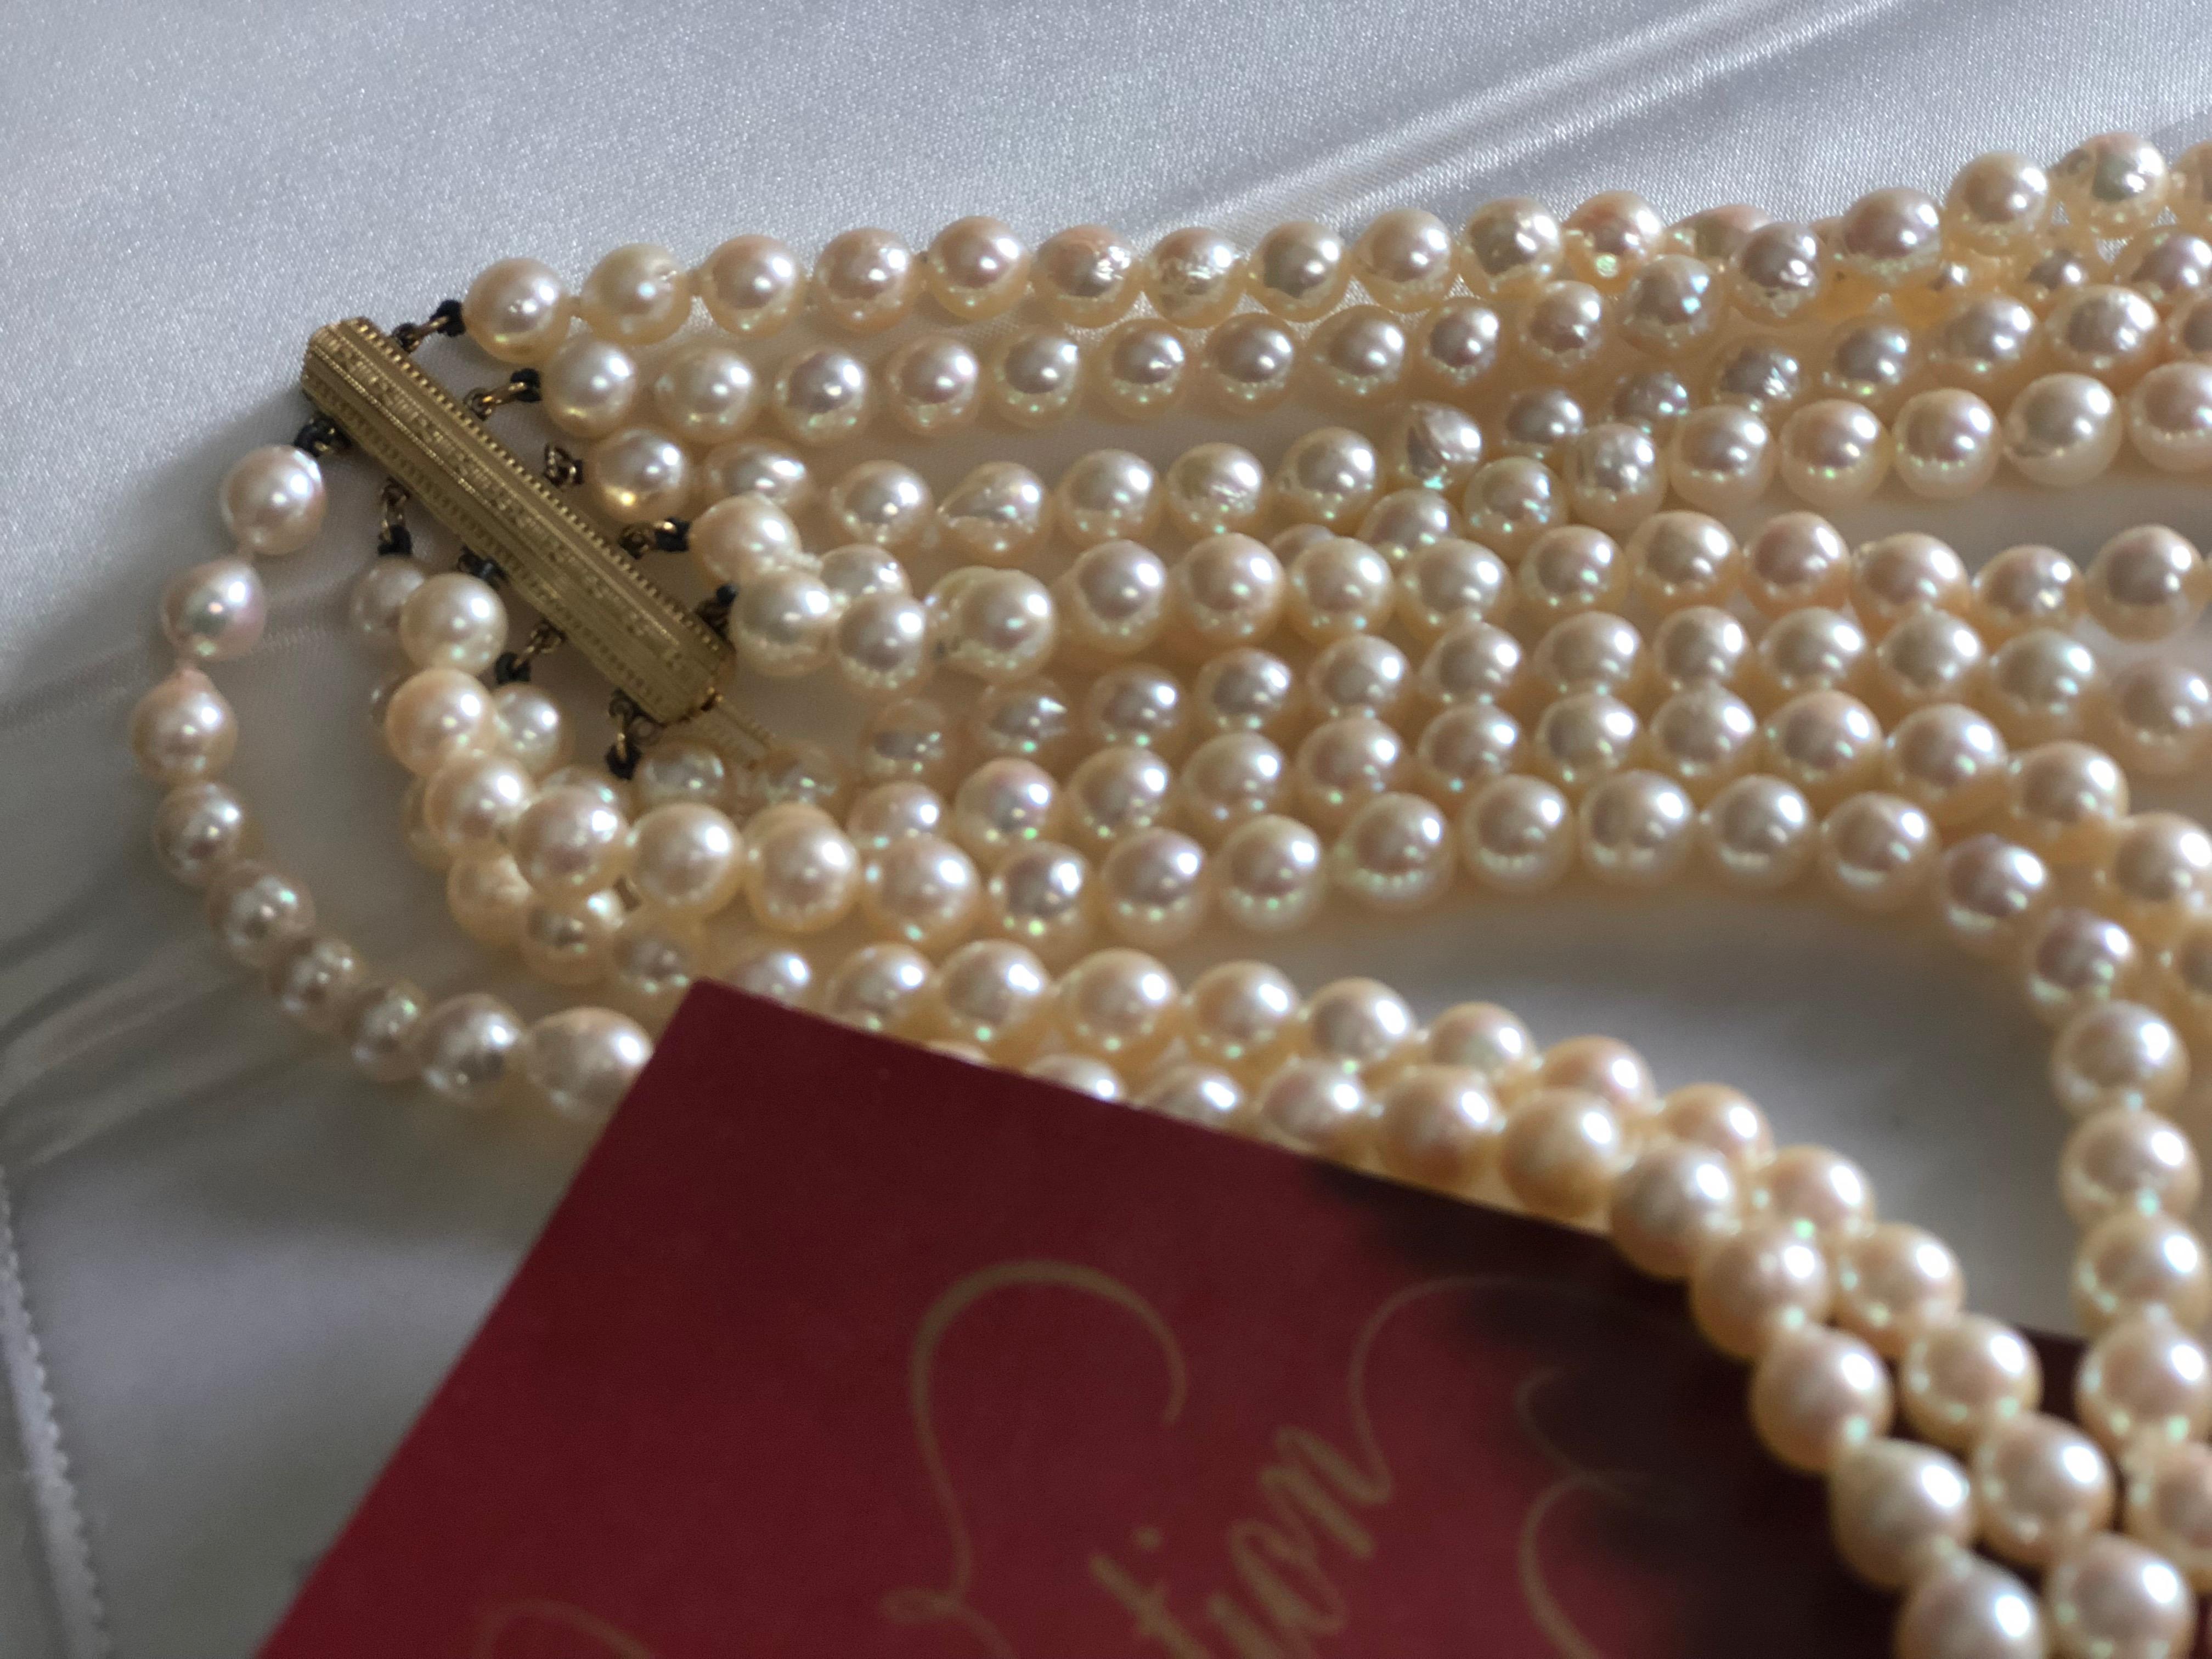 Very elegant five strand neckless of 7 mm. white pearls by Mikimoto, resting in the original box. 
Great condition.
Japan, circa 1950